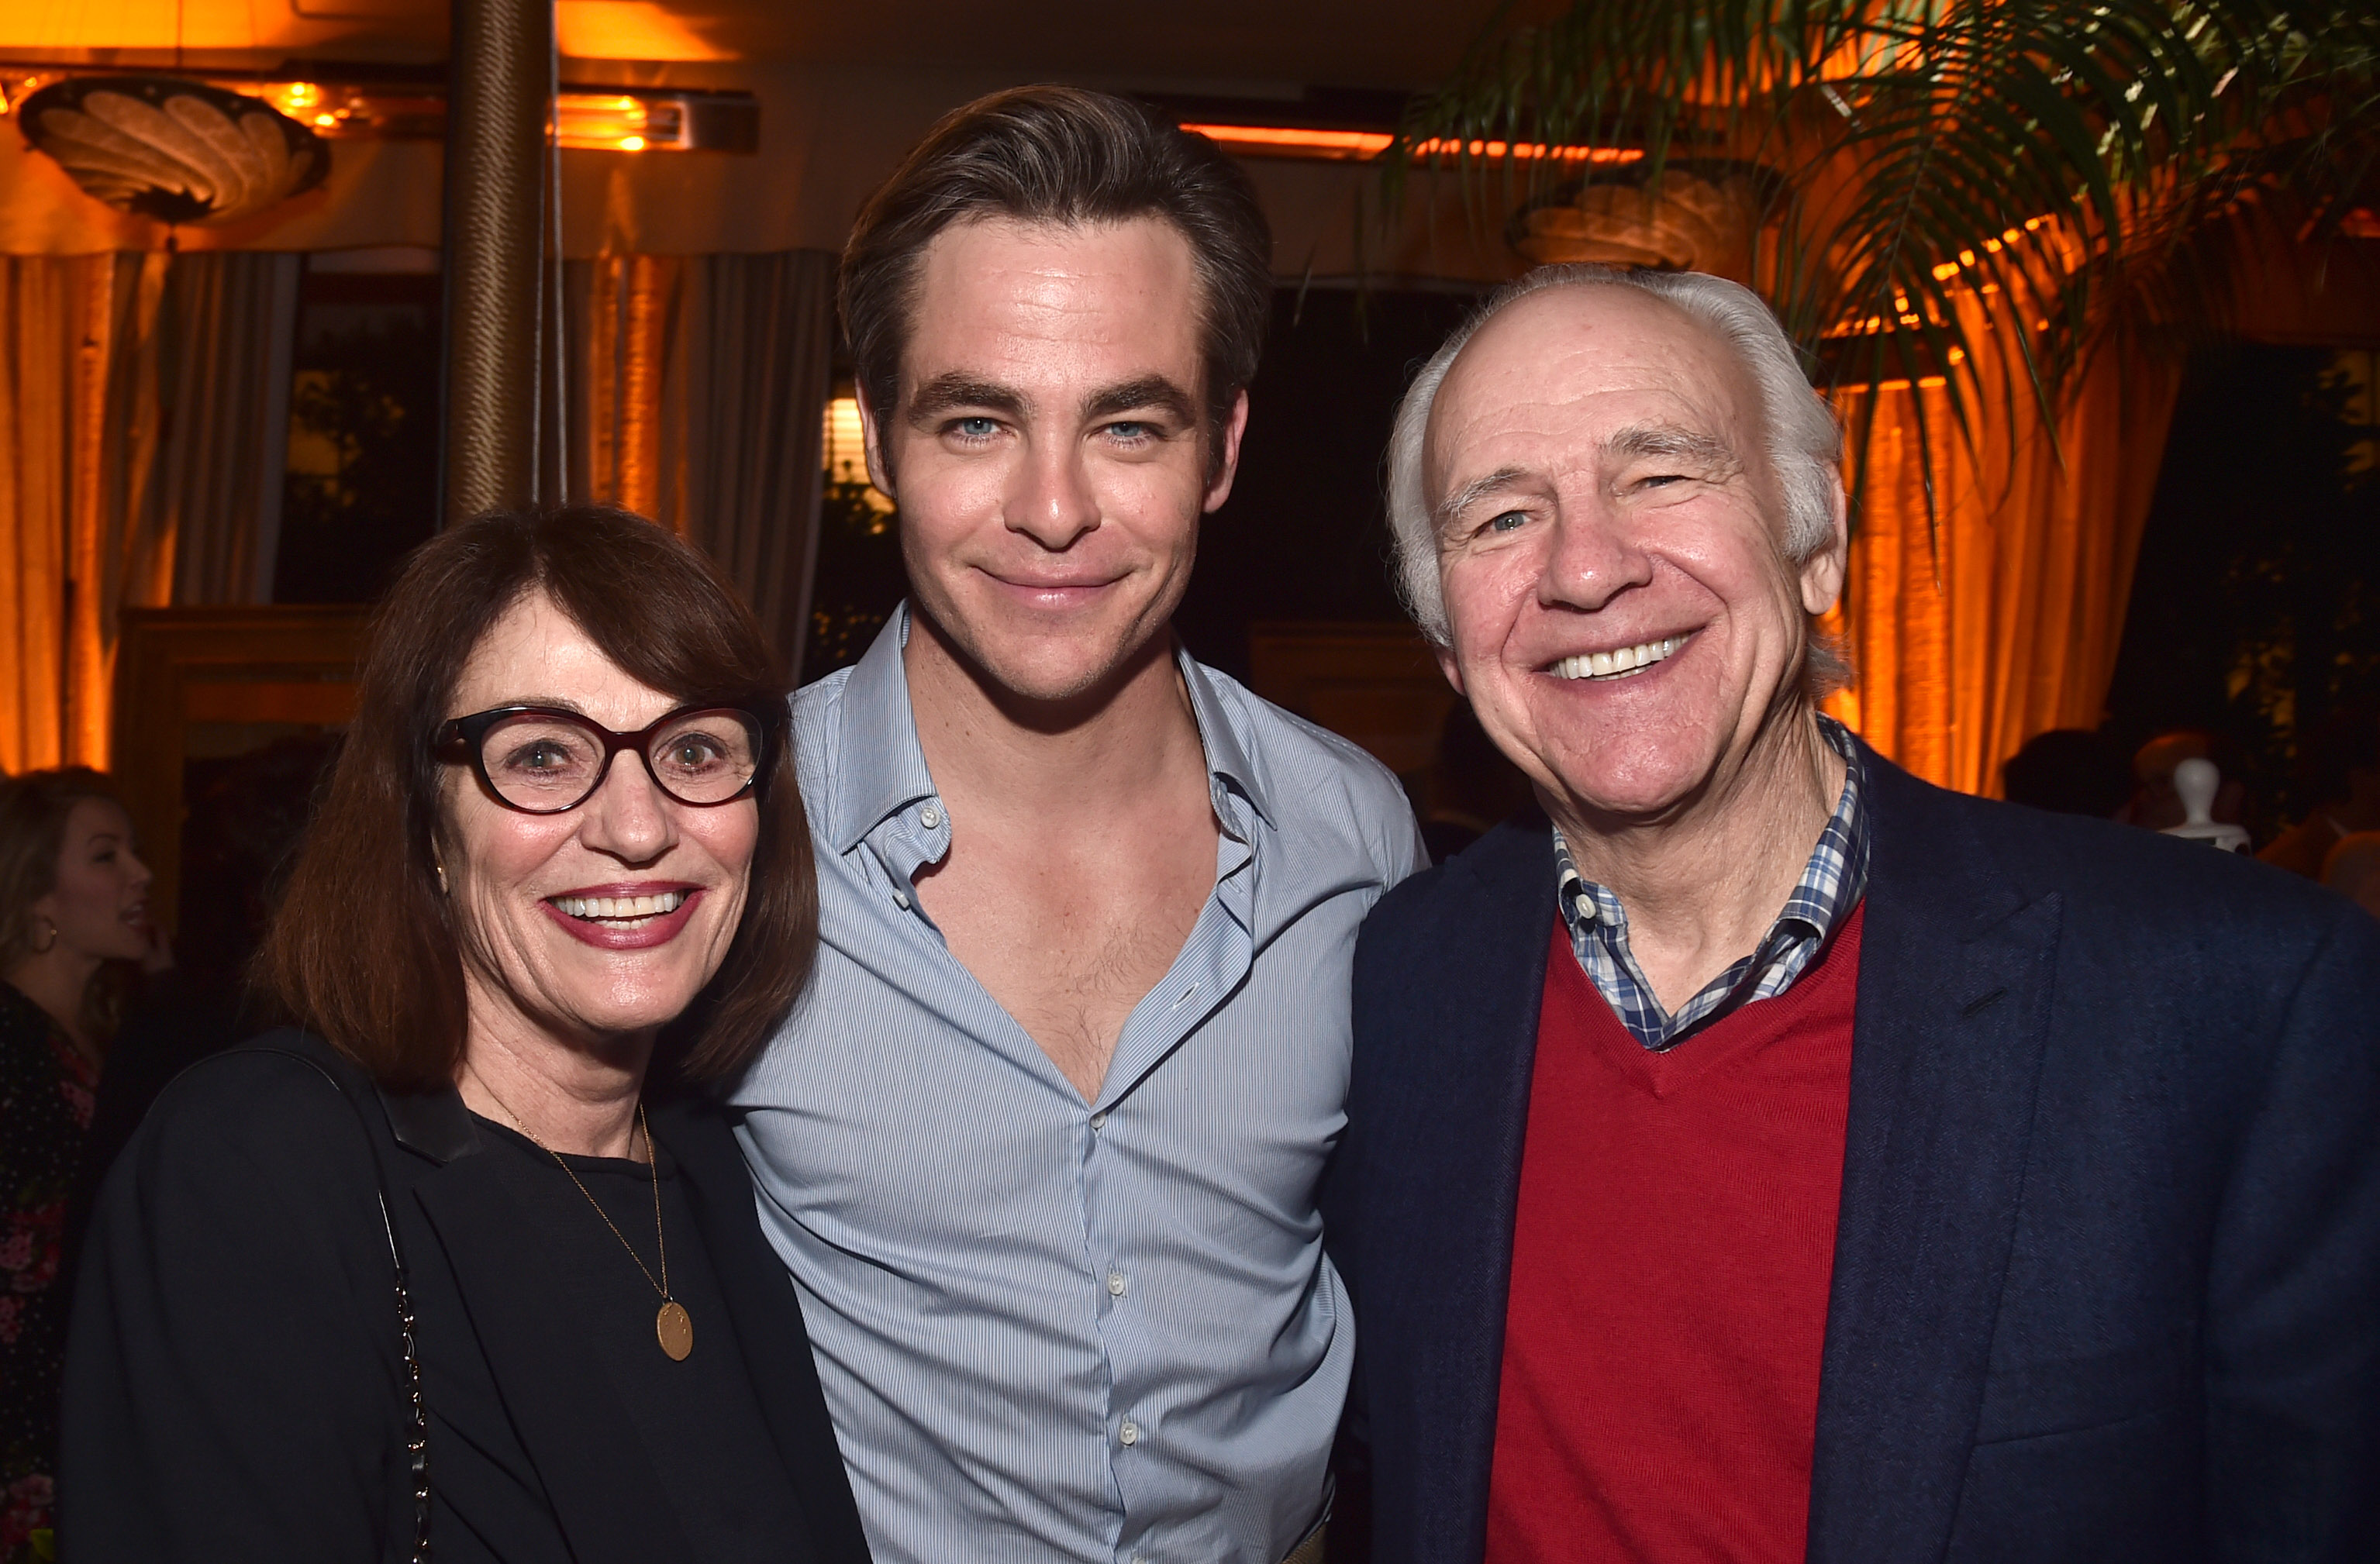 Gwynne Gilford, Chris Pine, and Robert Pine at the after party for the premiere of "I Am The Night" on January 24, 2019, in Los Angeles, California | Source: Getty Images